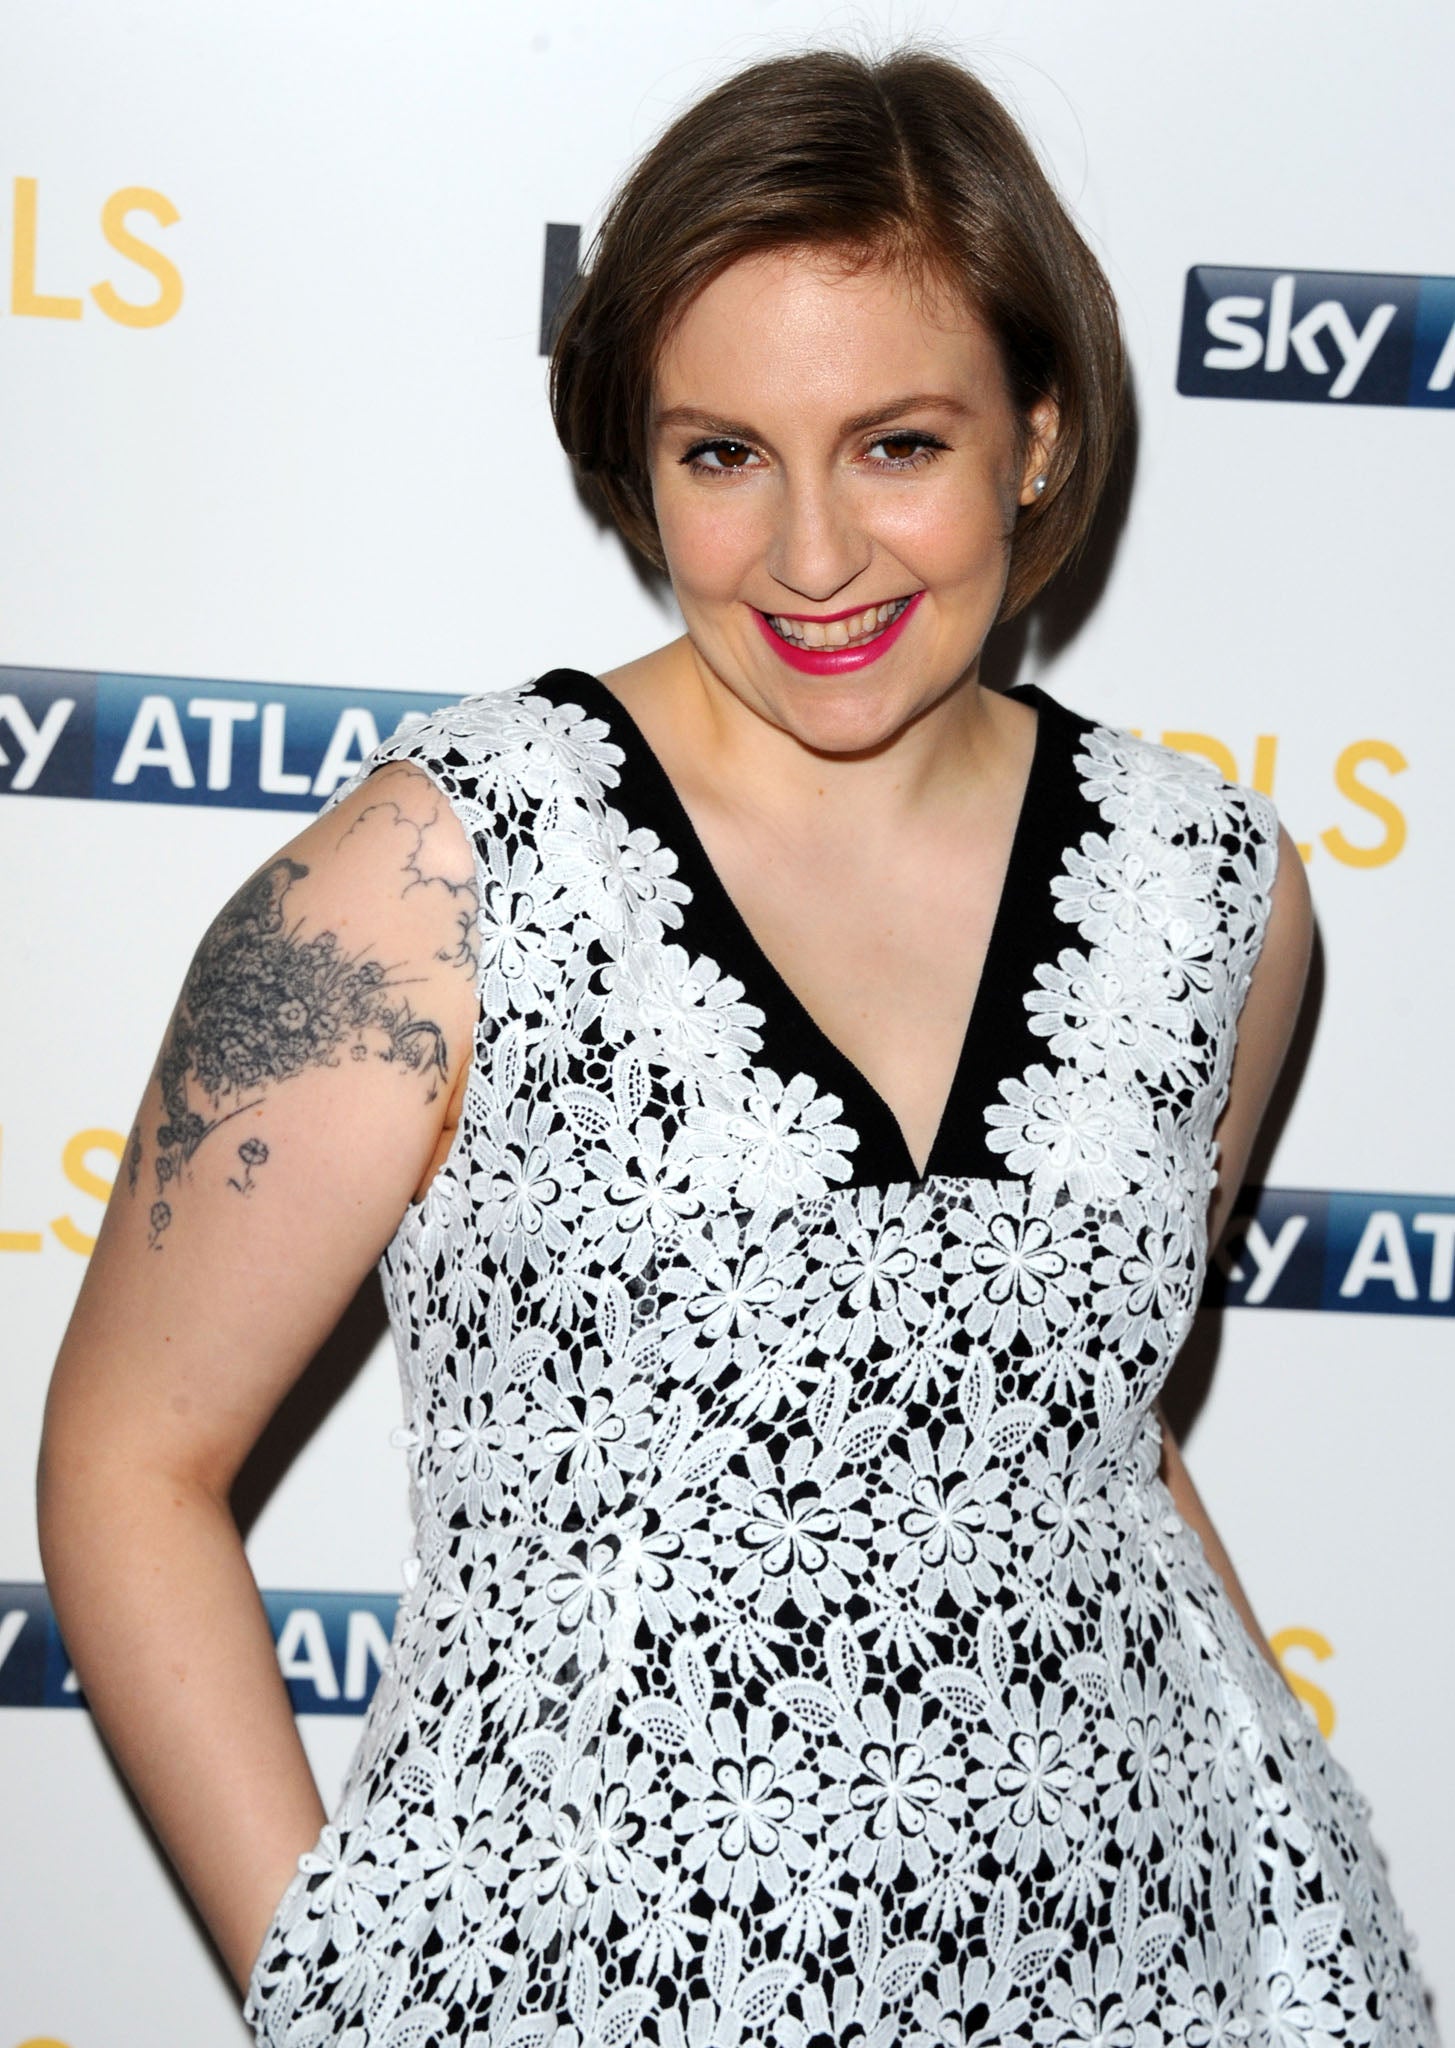 Lena Dunham at the Girls series 3 premiere in London